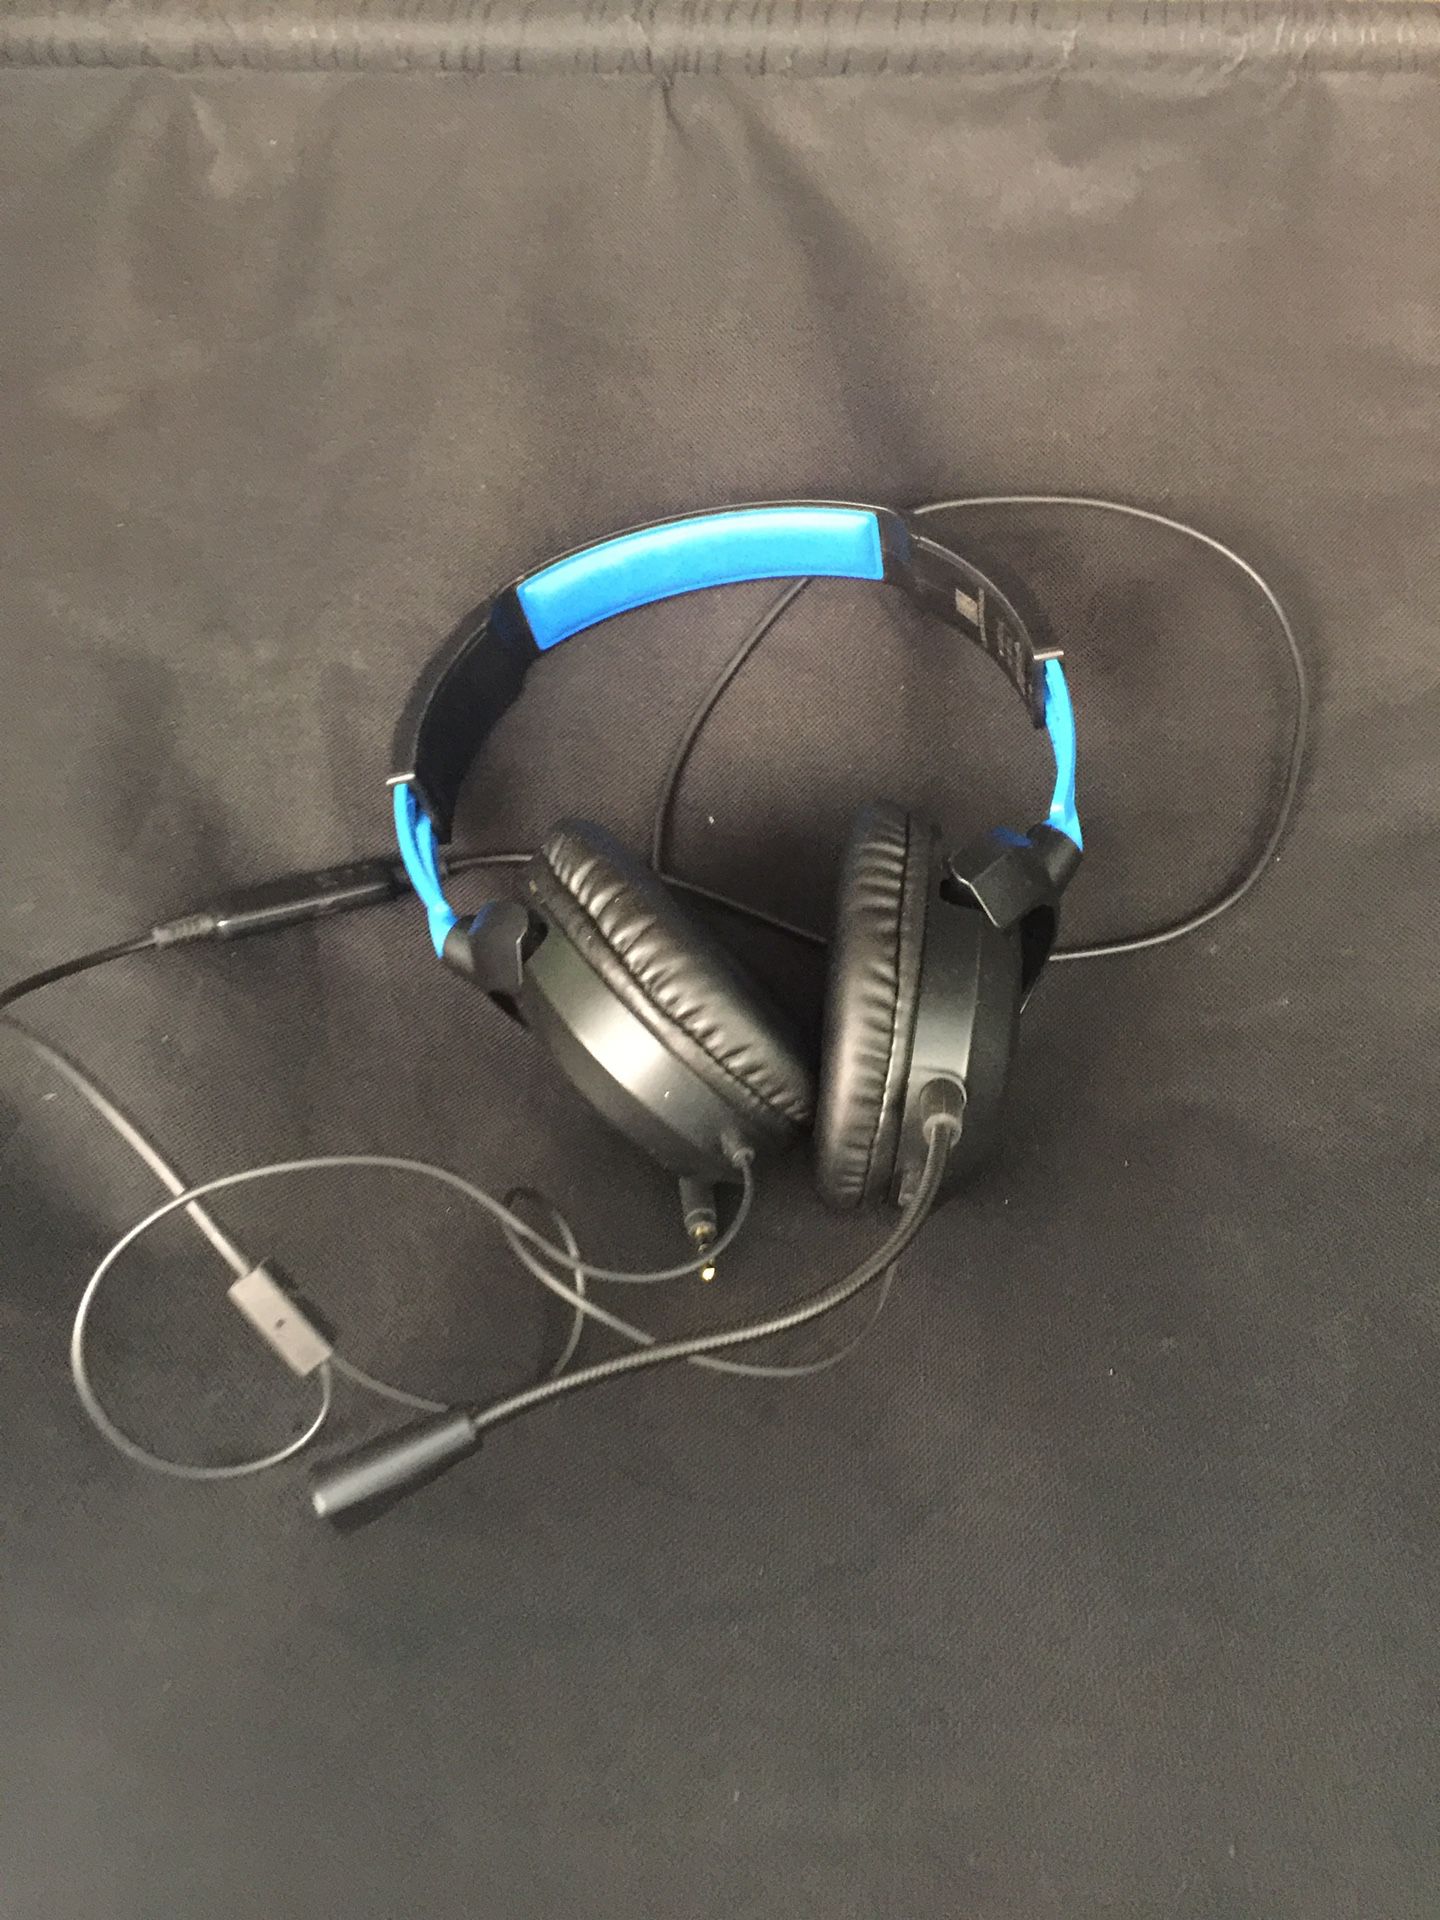 Headset for videos game or phone calls or simple listening music.